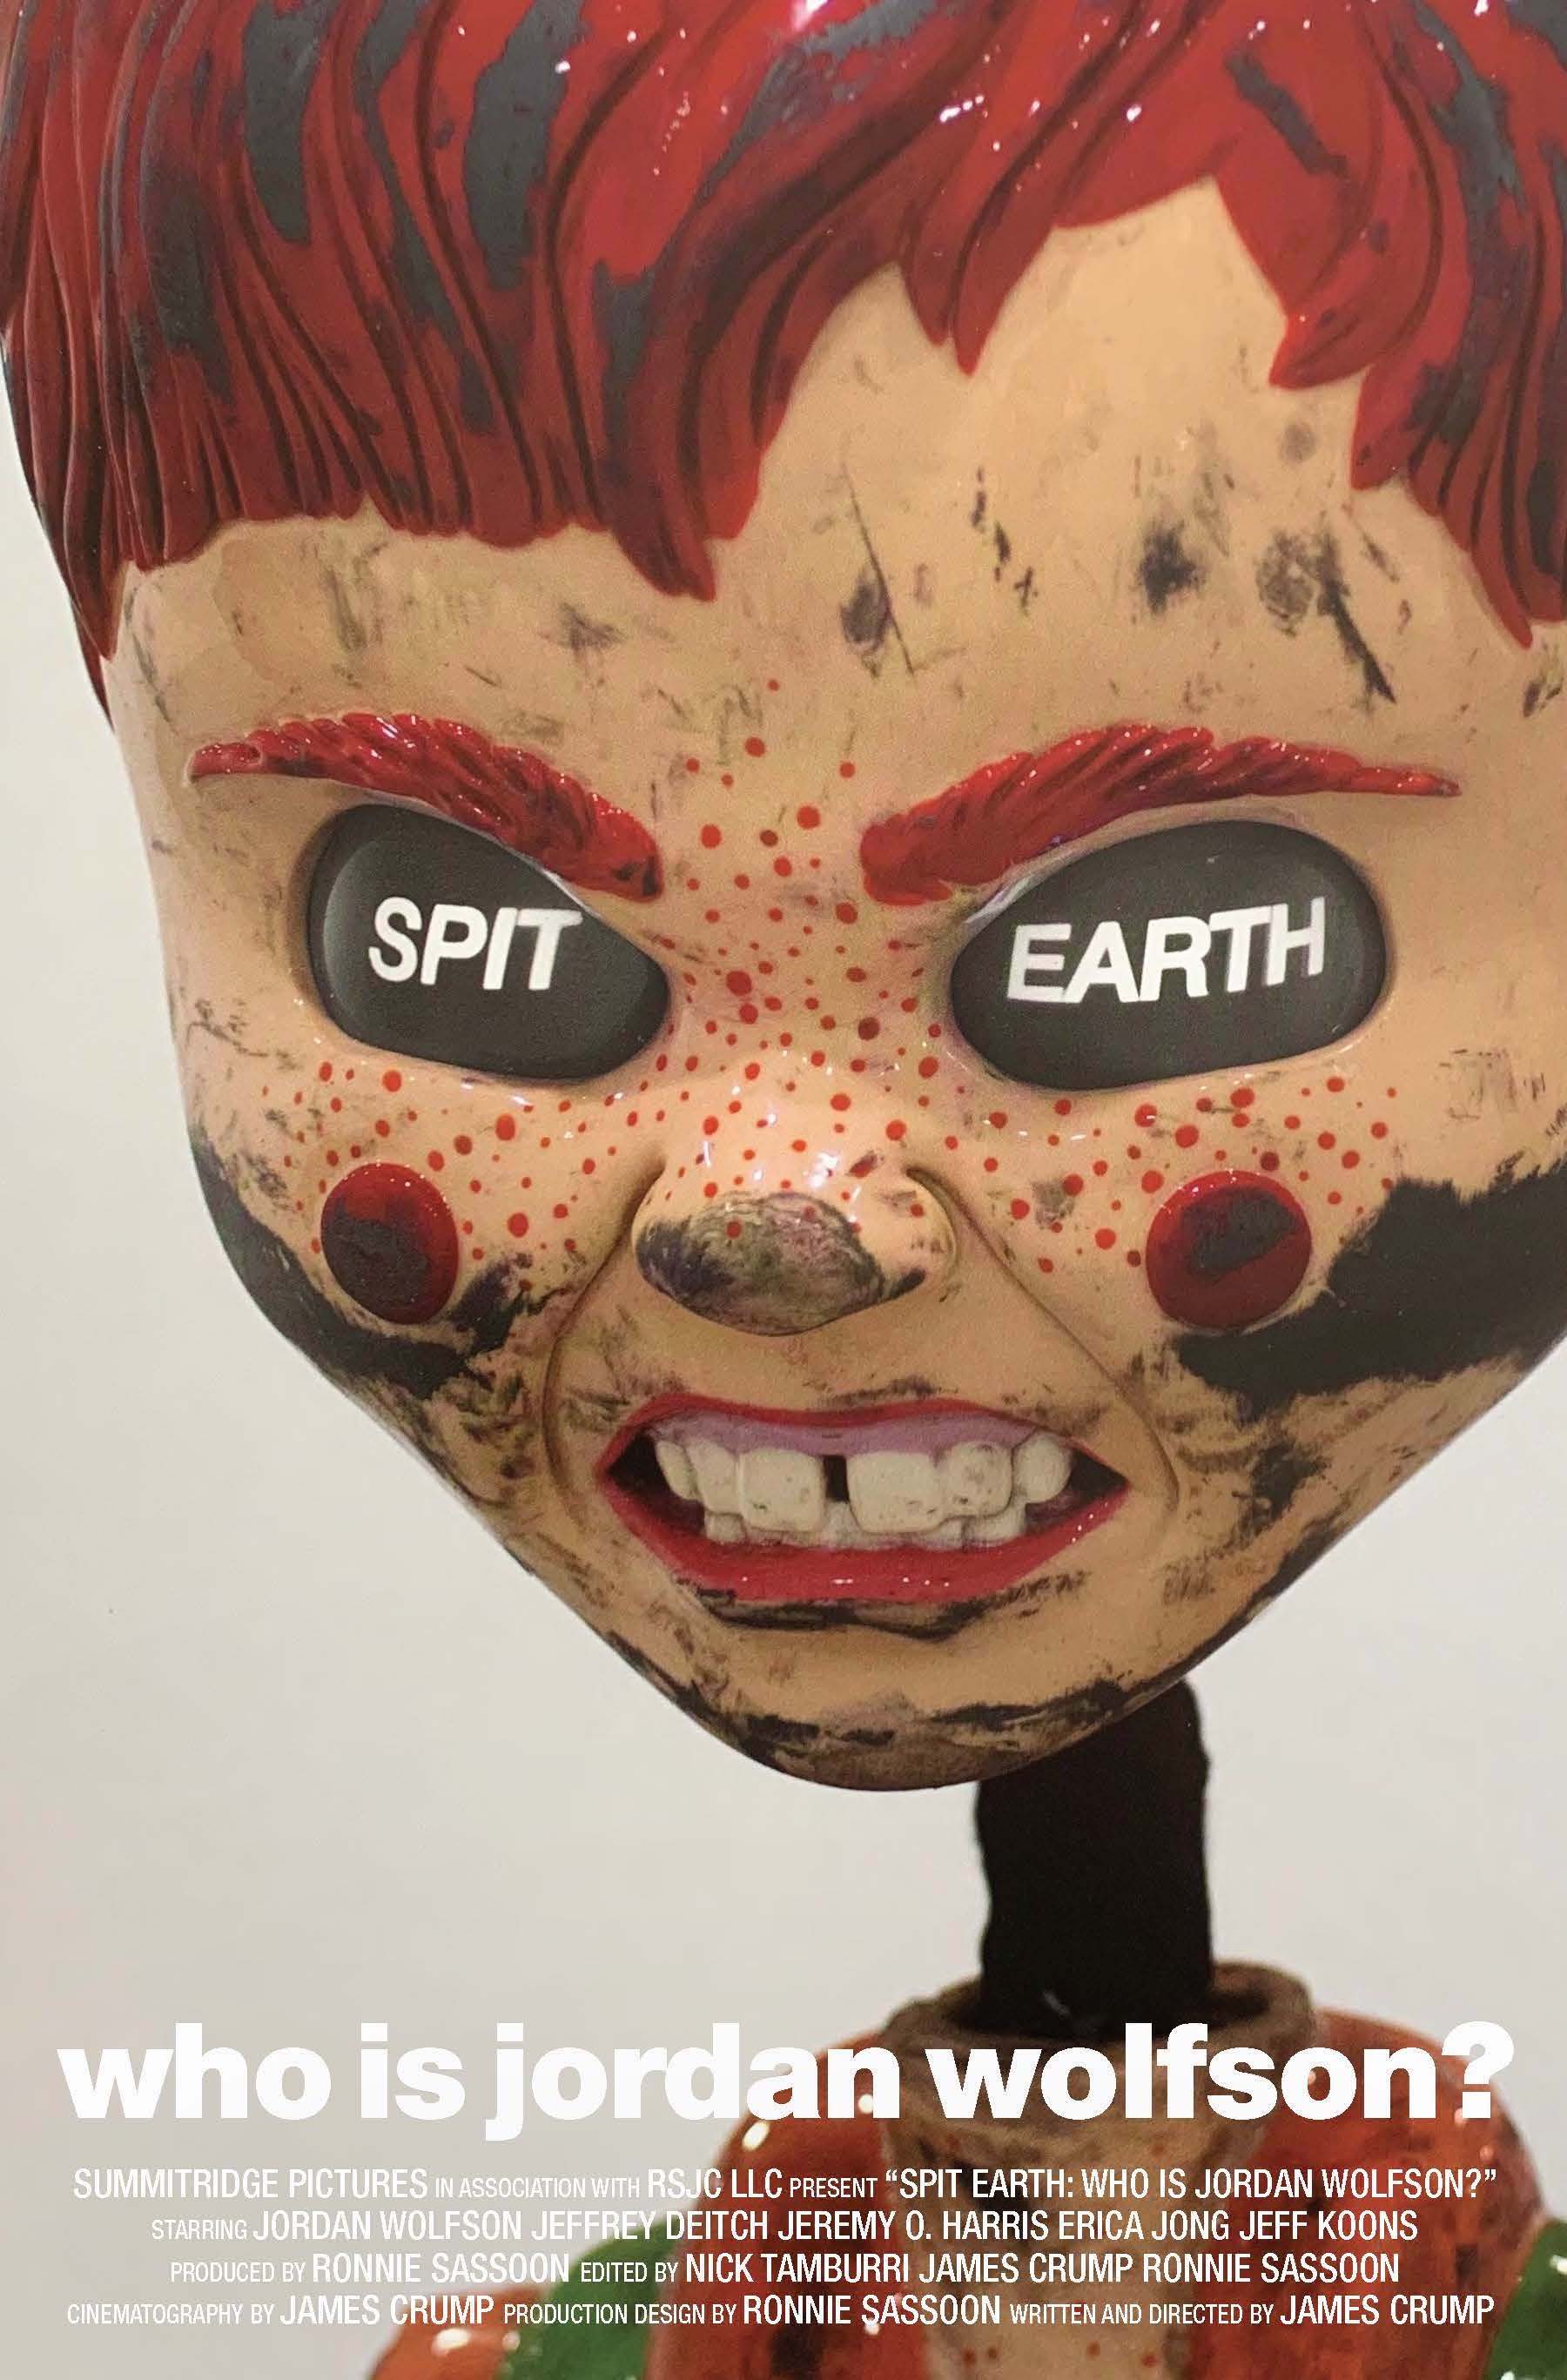 Spit Earth: Who is Jordan Wolfson?